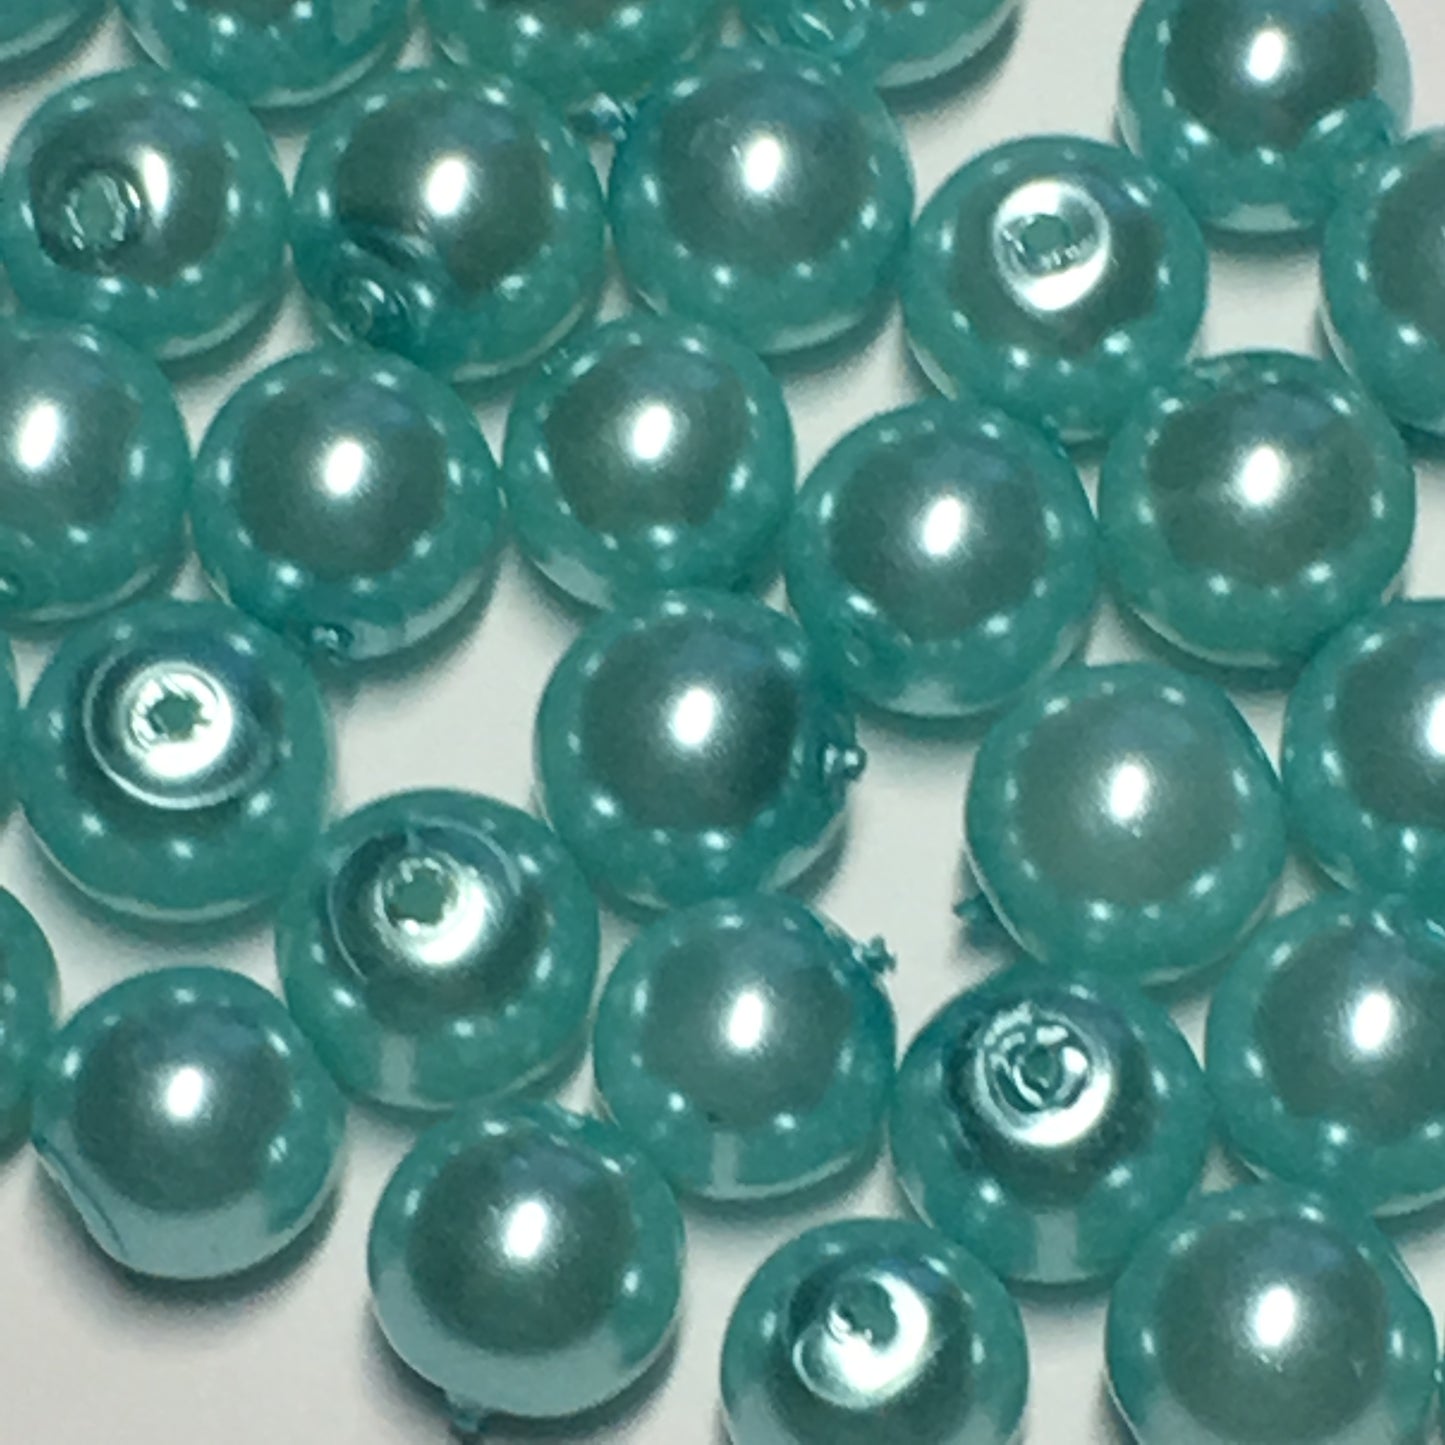 Light Blue Pearl Glass Round Beads, 6 mm, 48 Beads